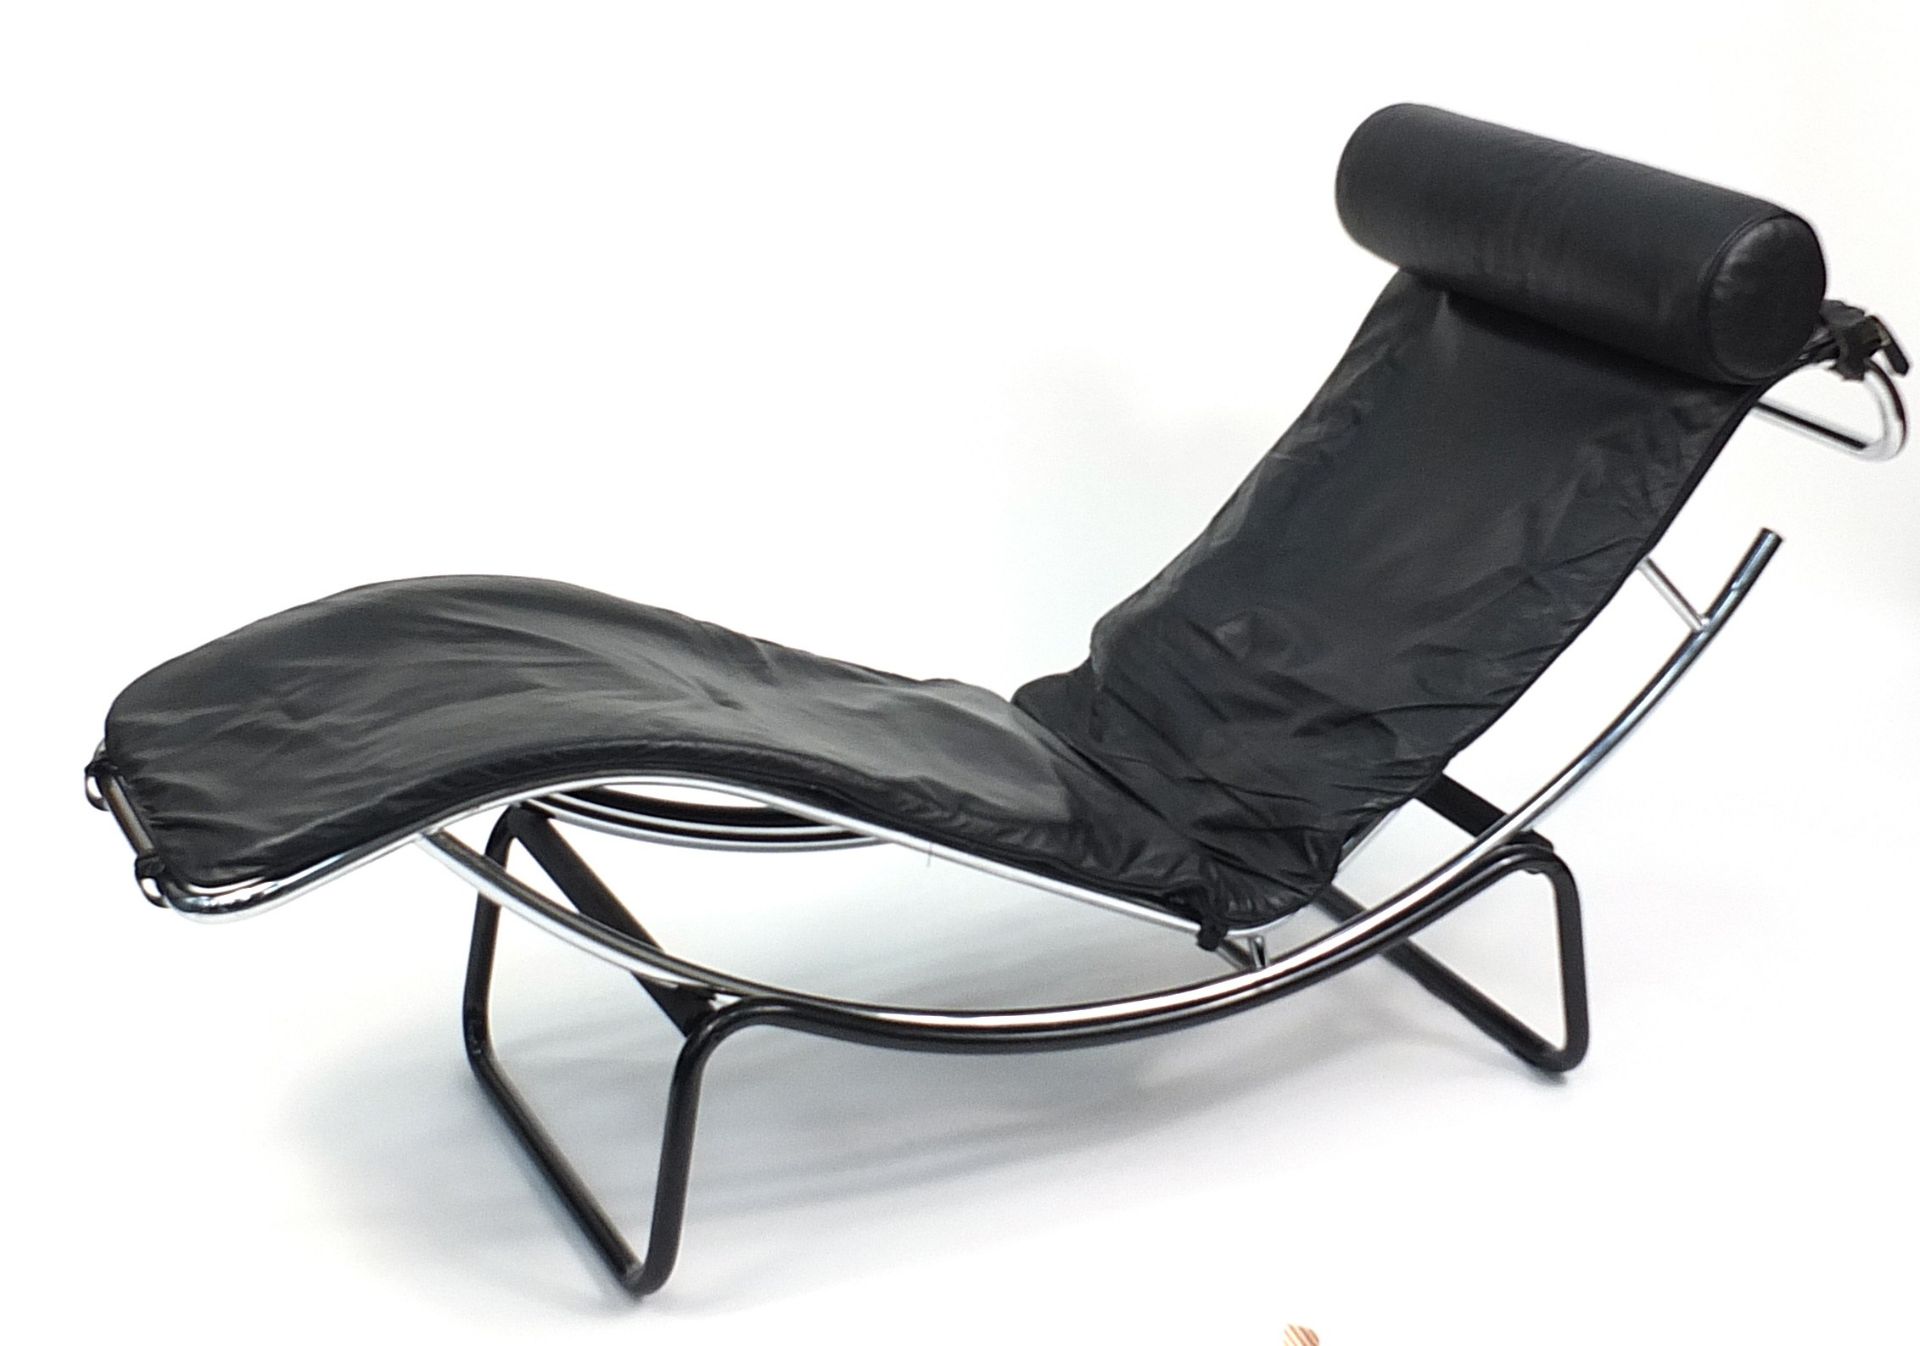 Le Corbusier LC4 chaise longue lounger, 160cm in length, 160cm in length